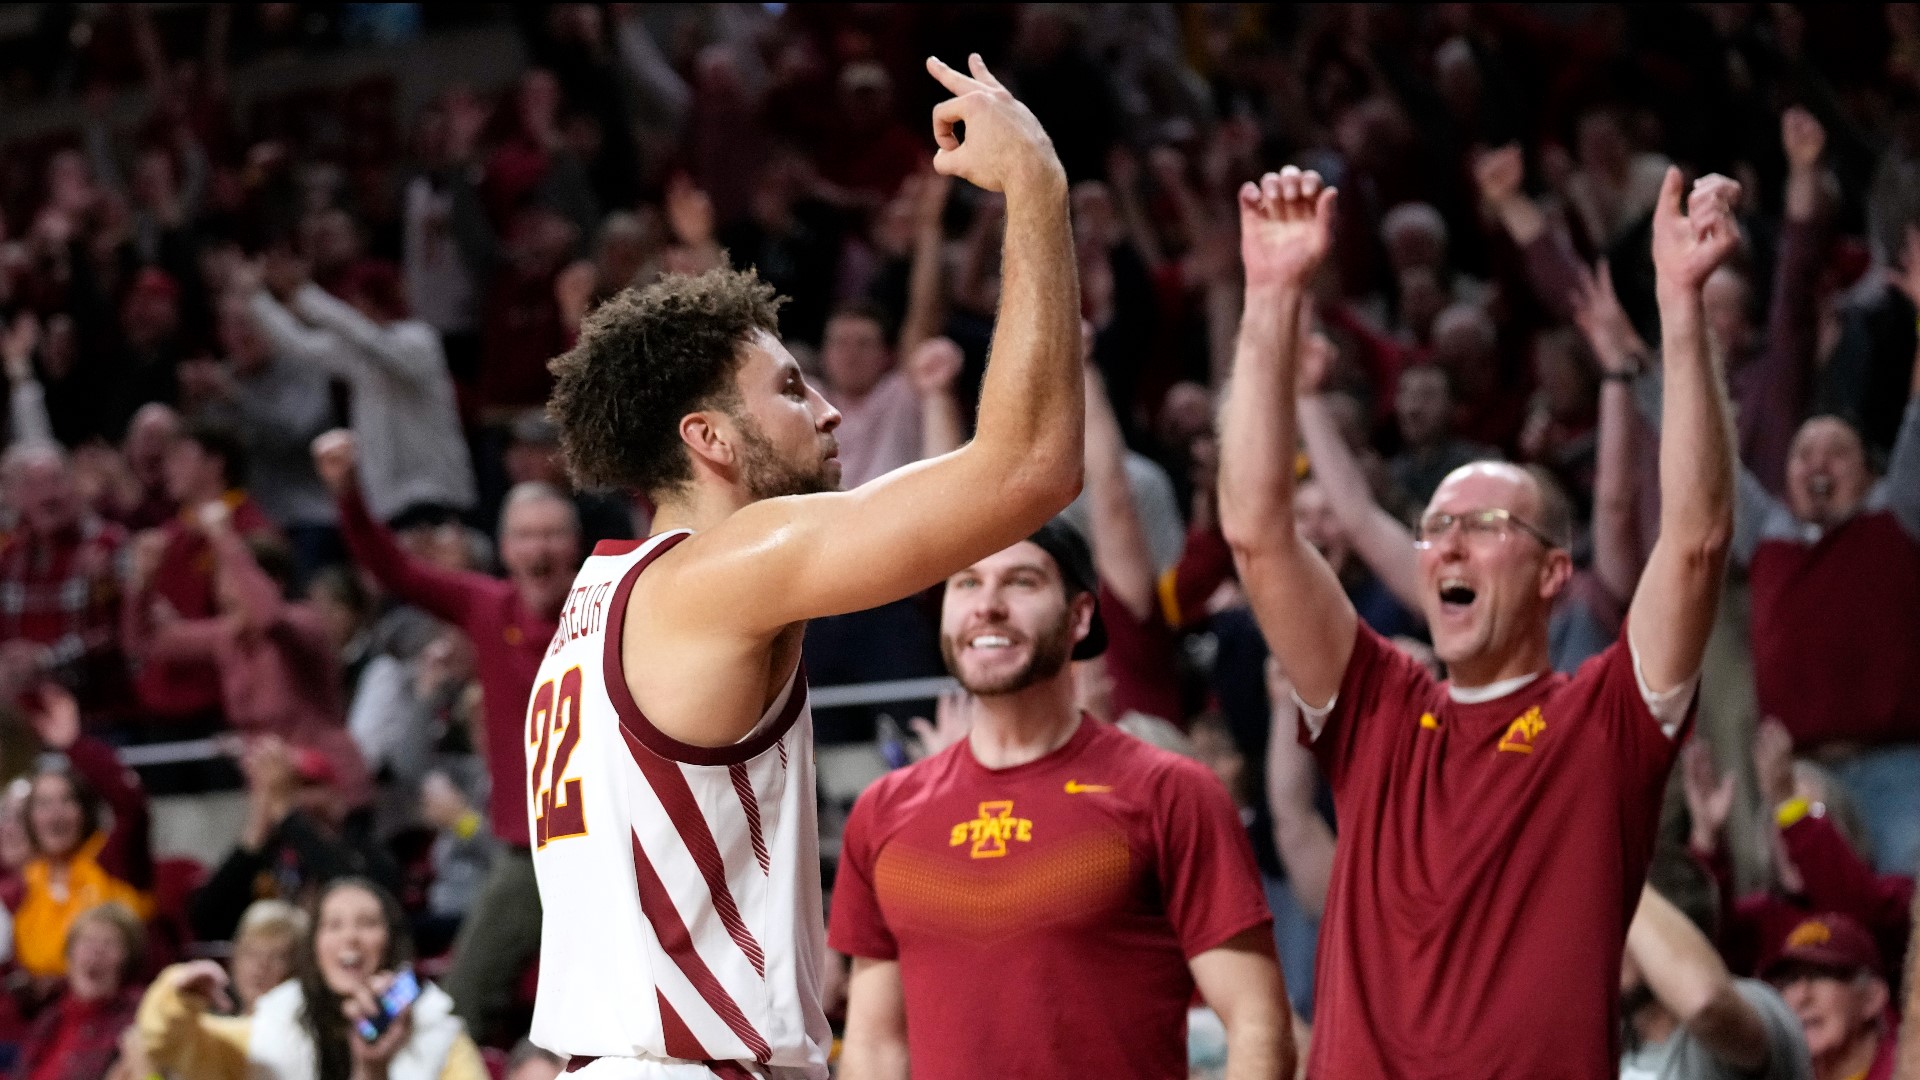 Iowa State rolled past Texas Tech last night to remain undefeated in Big 12 play. Senior guard Gabe Kalscheur led the way with 25 points.